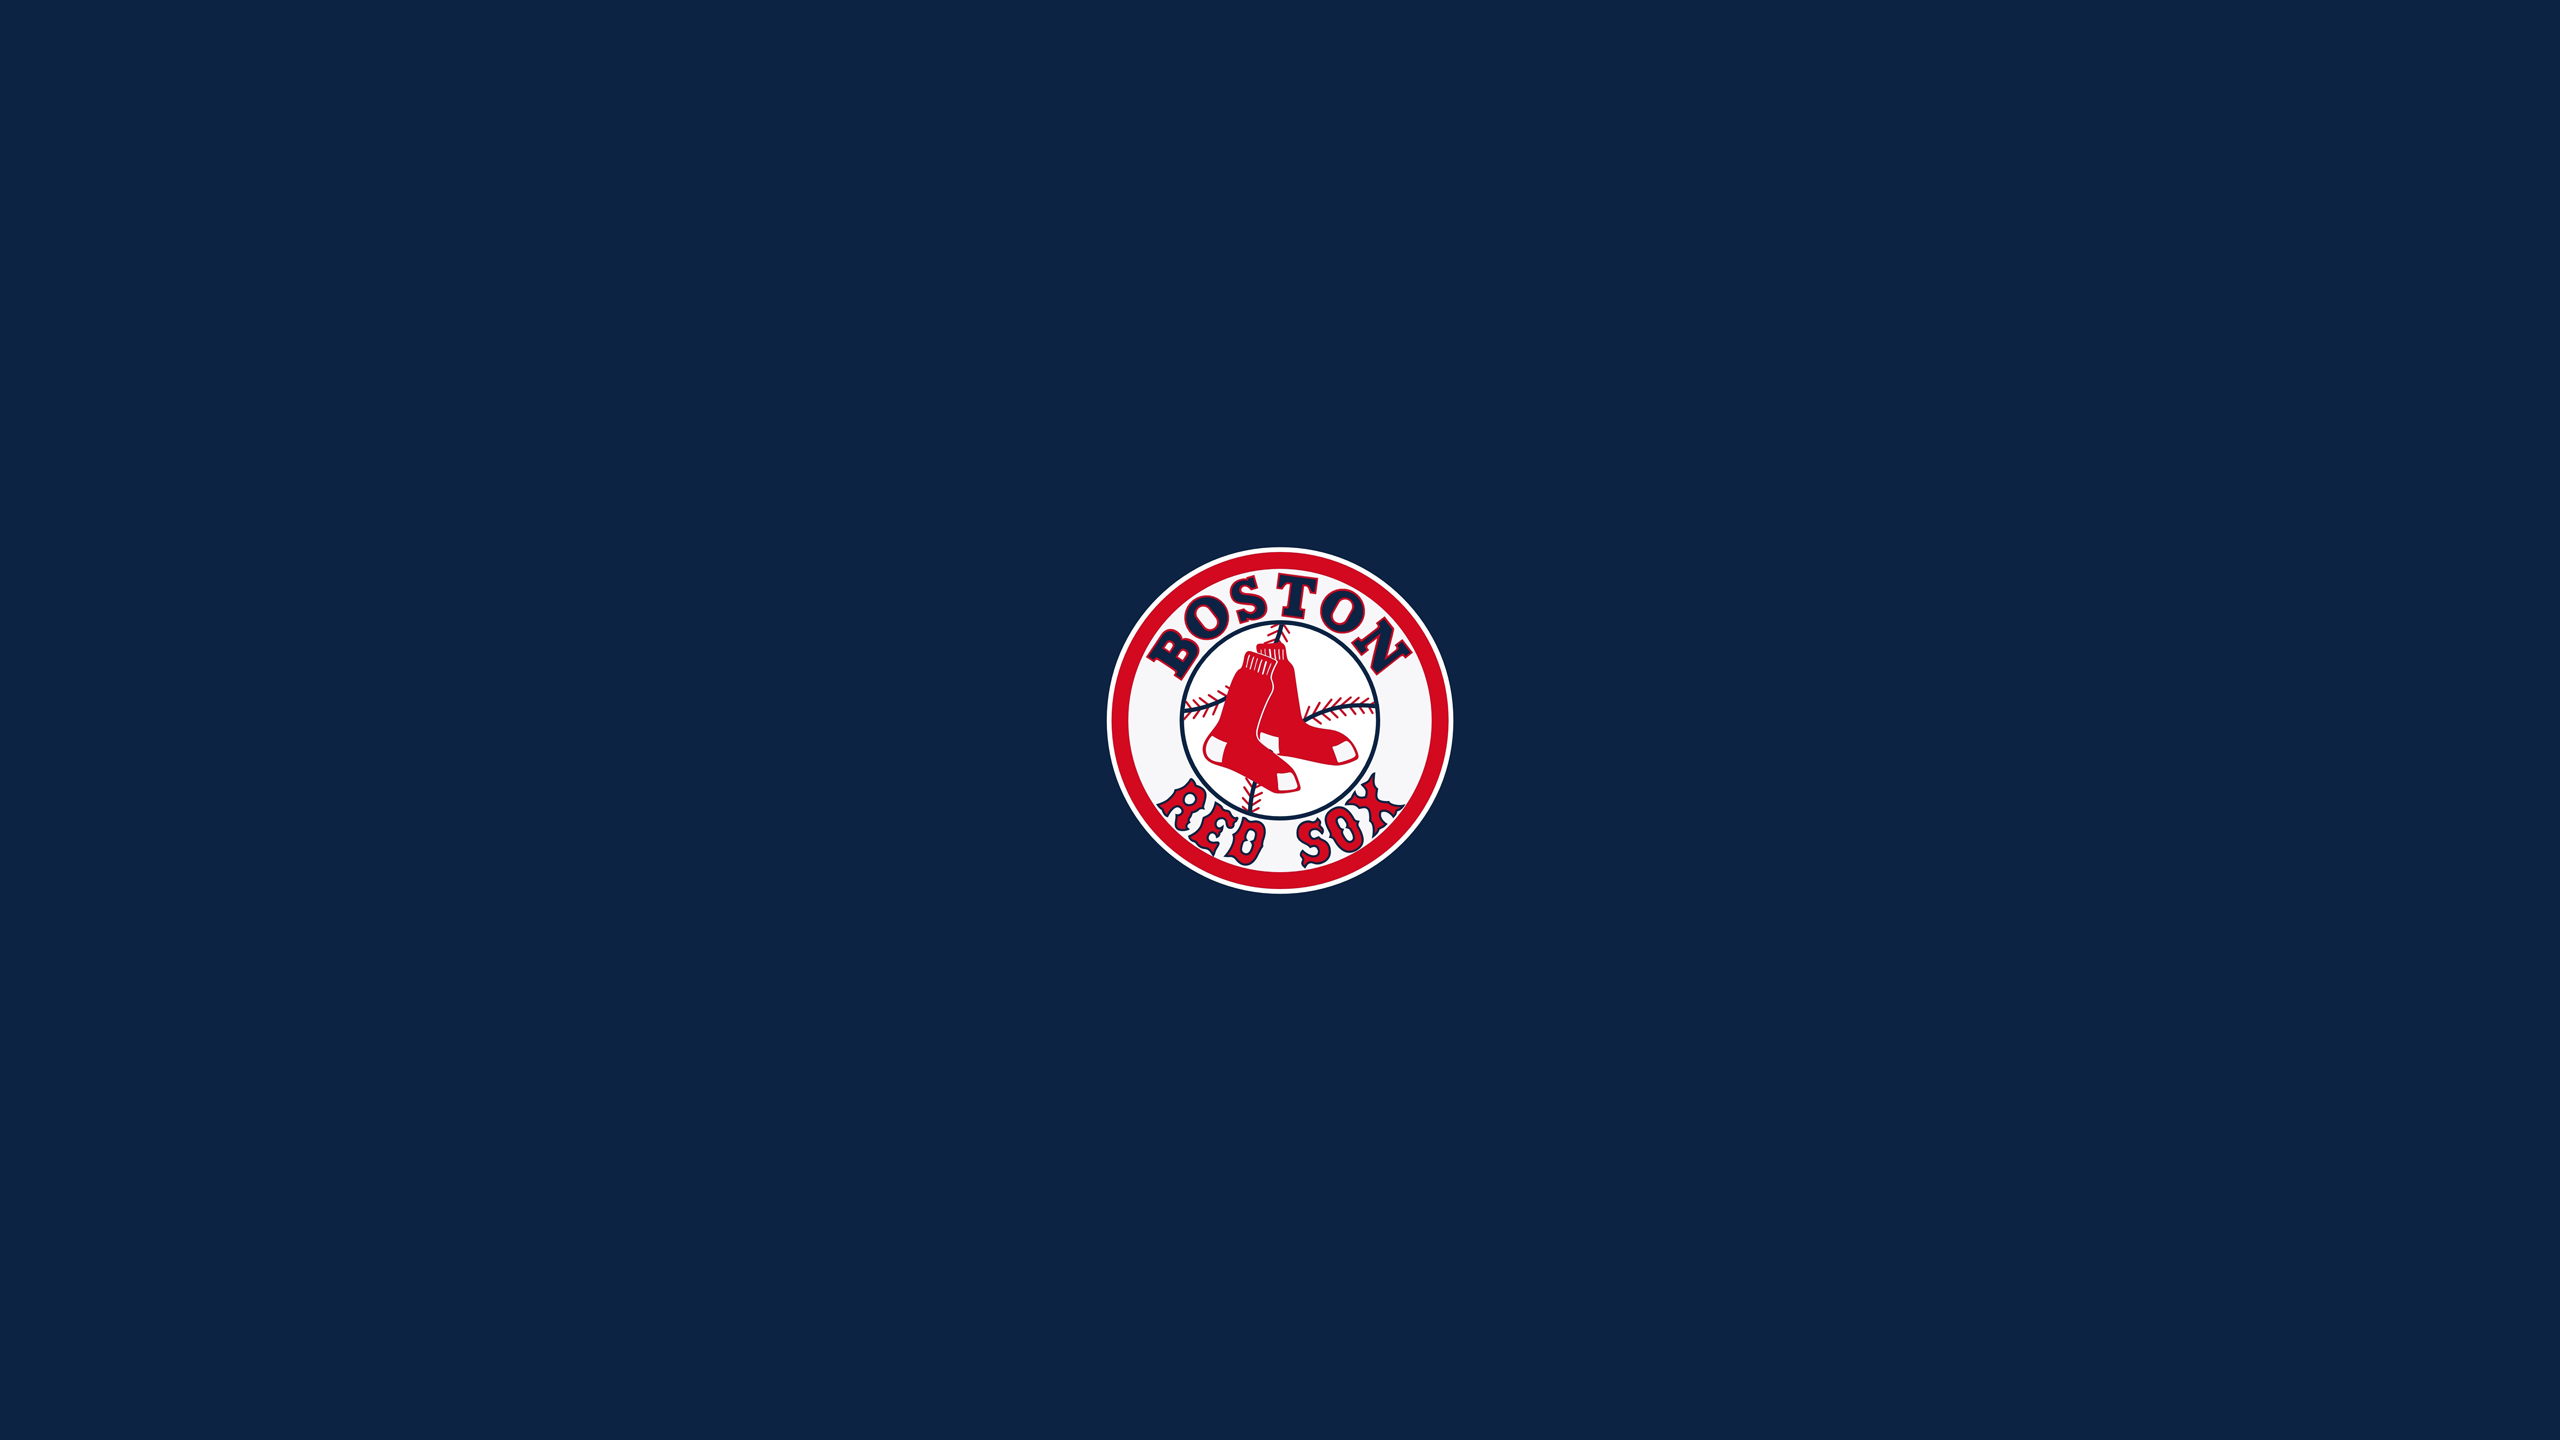 Boston Red Sox Logo Wallpapers 2560x1440